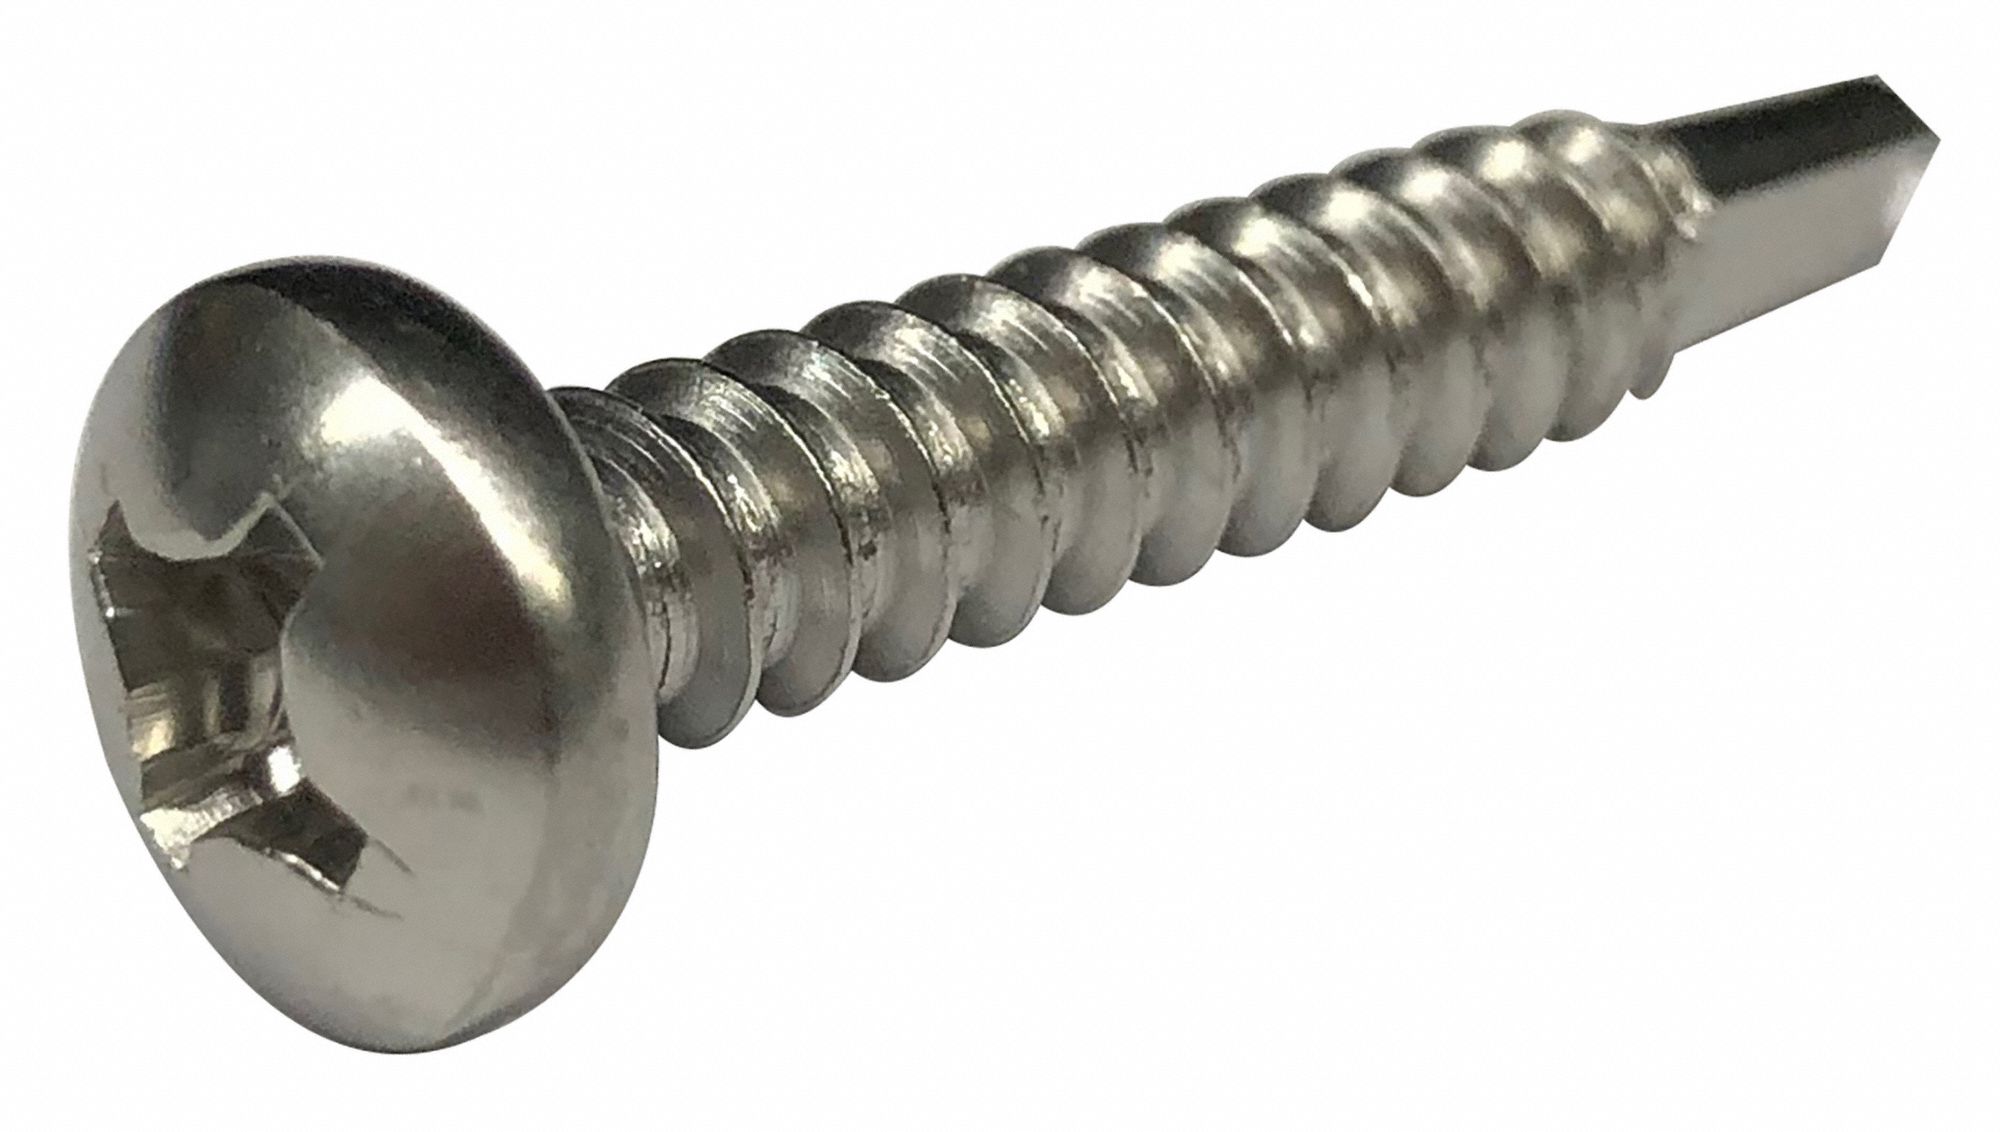 Pack of 50 1/4 Length Passivated Finish Star Drive Small Parts 0404RTP410 410 Stainless Steel Thread Rolling Screw for Metal Pack of 50 Pan Head 1/4 Length #4-40 Thread Size 